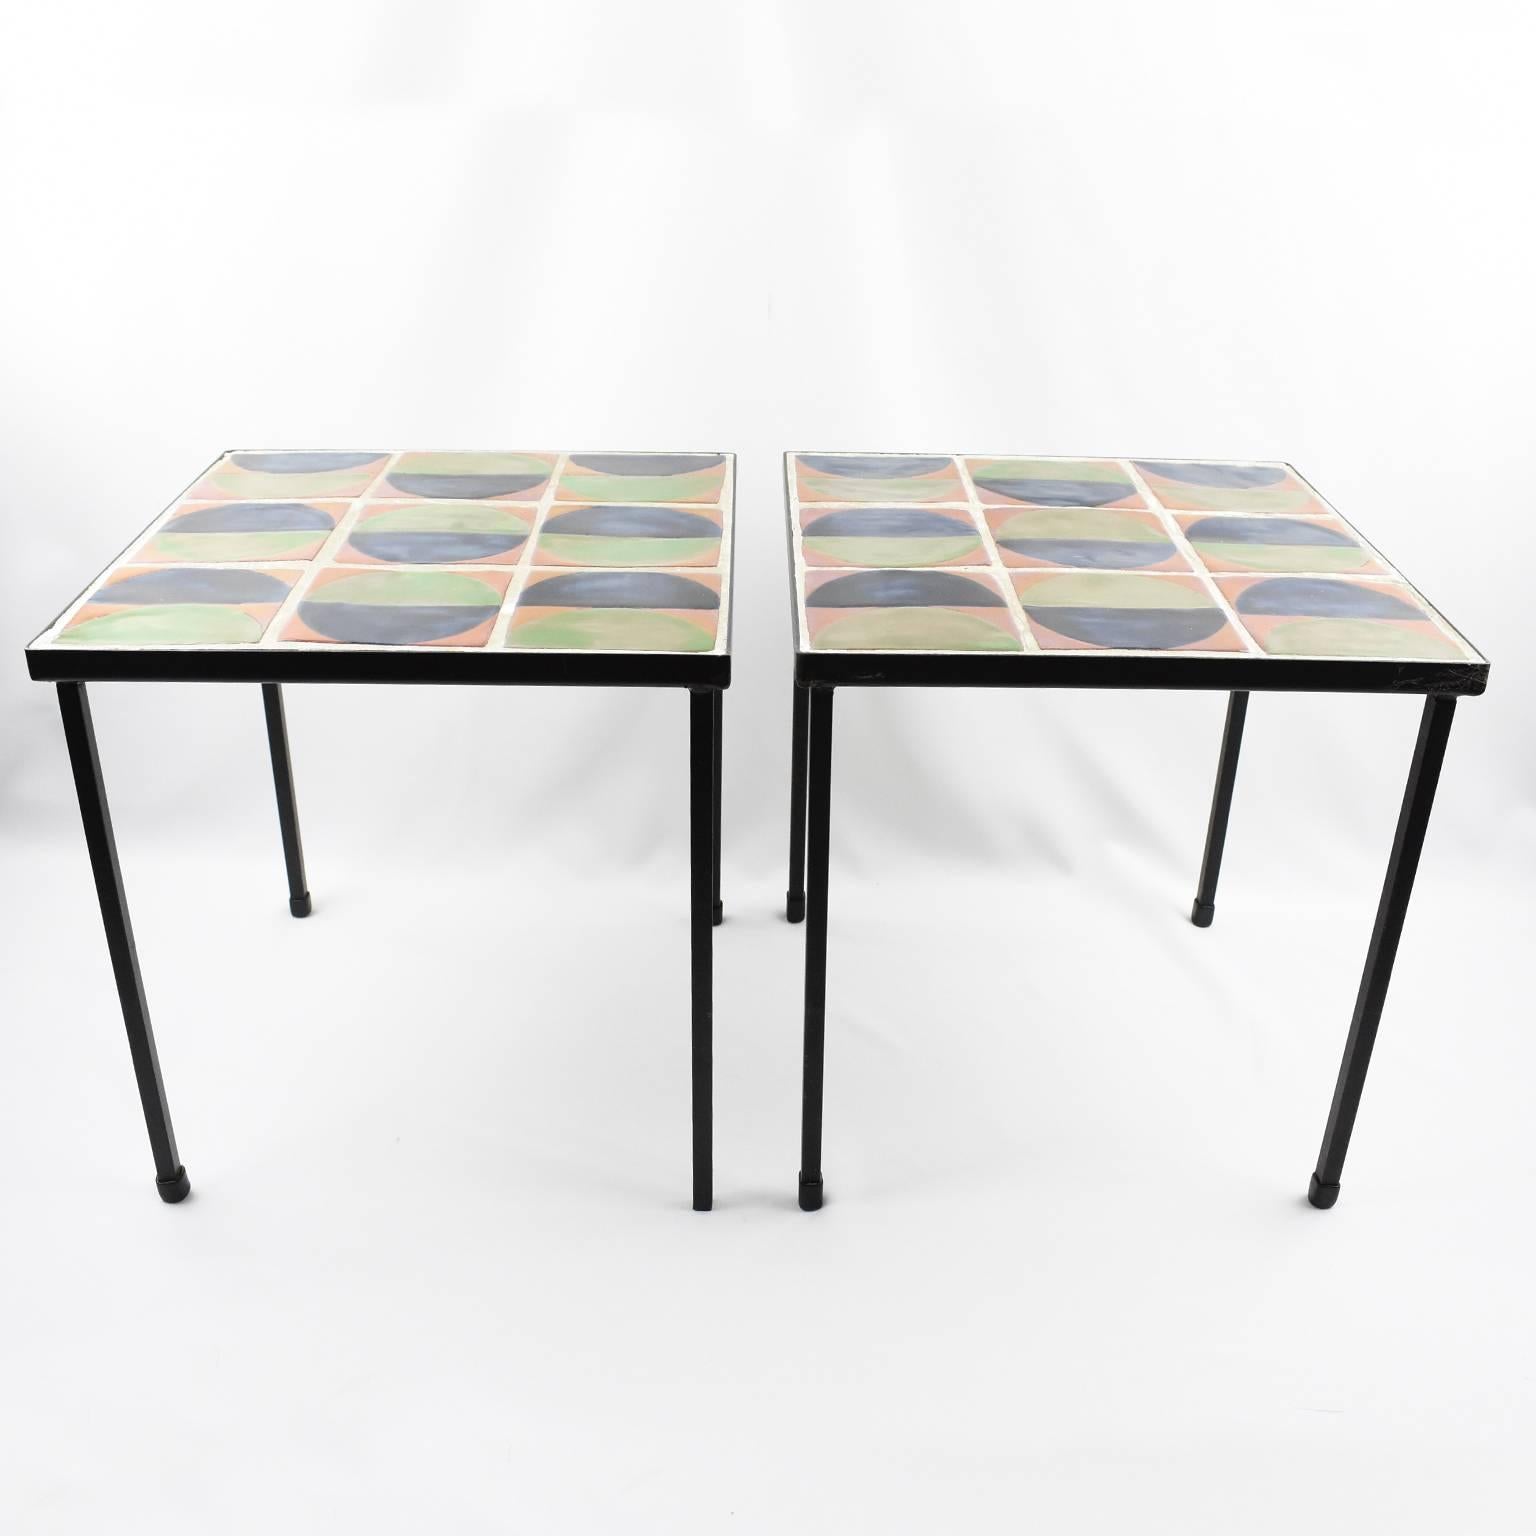 1950s French Wrought Iron and Ceramic Tile Side or Coffee Table, a Pair 2